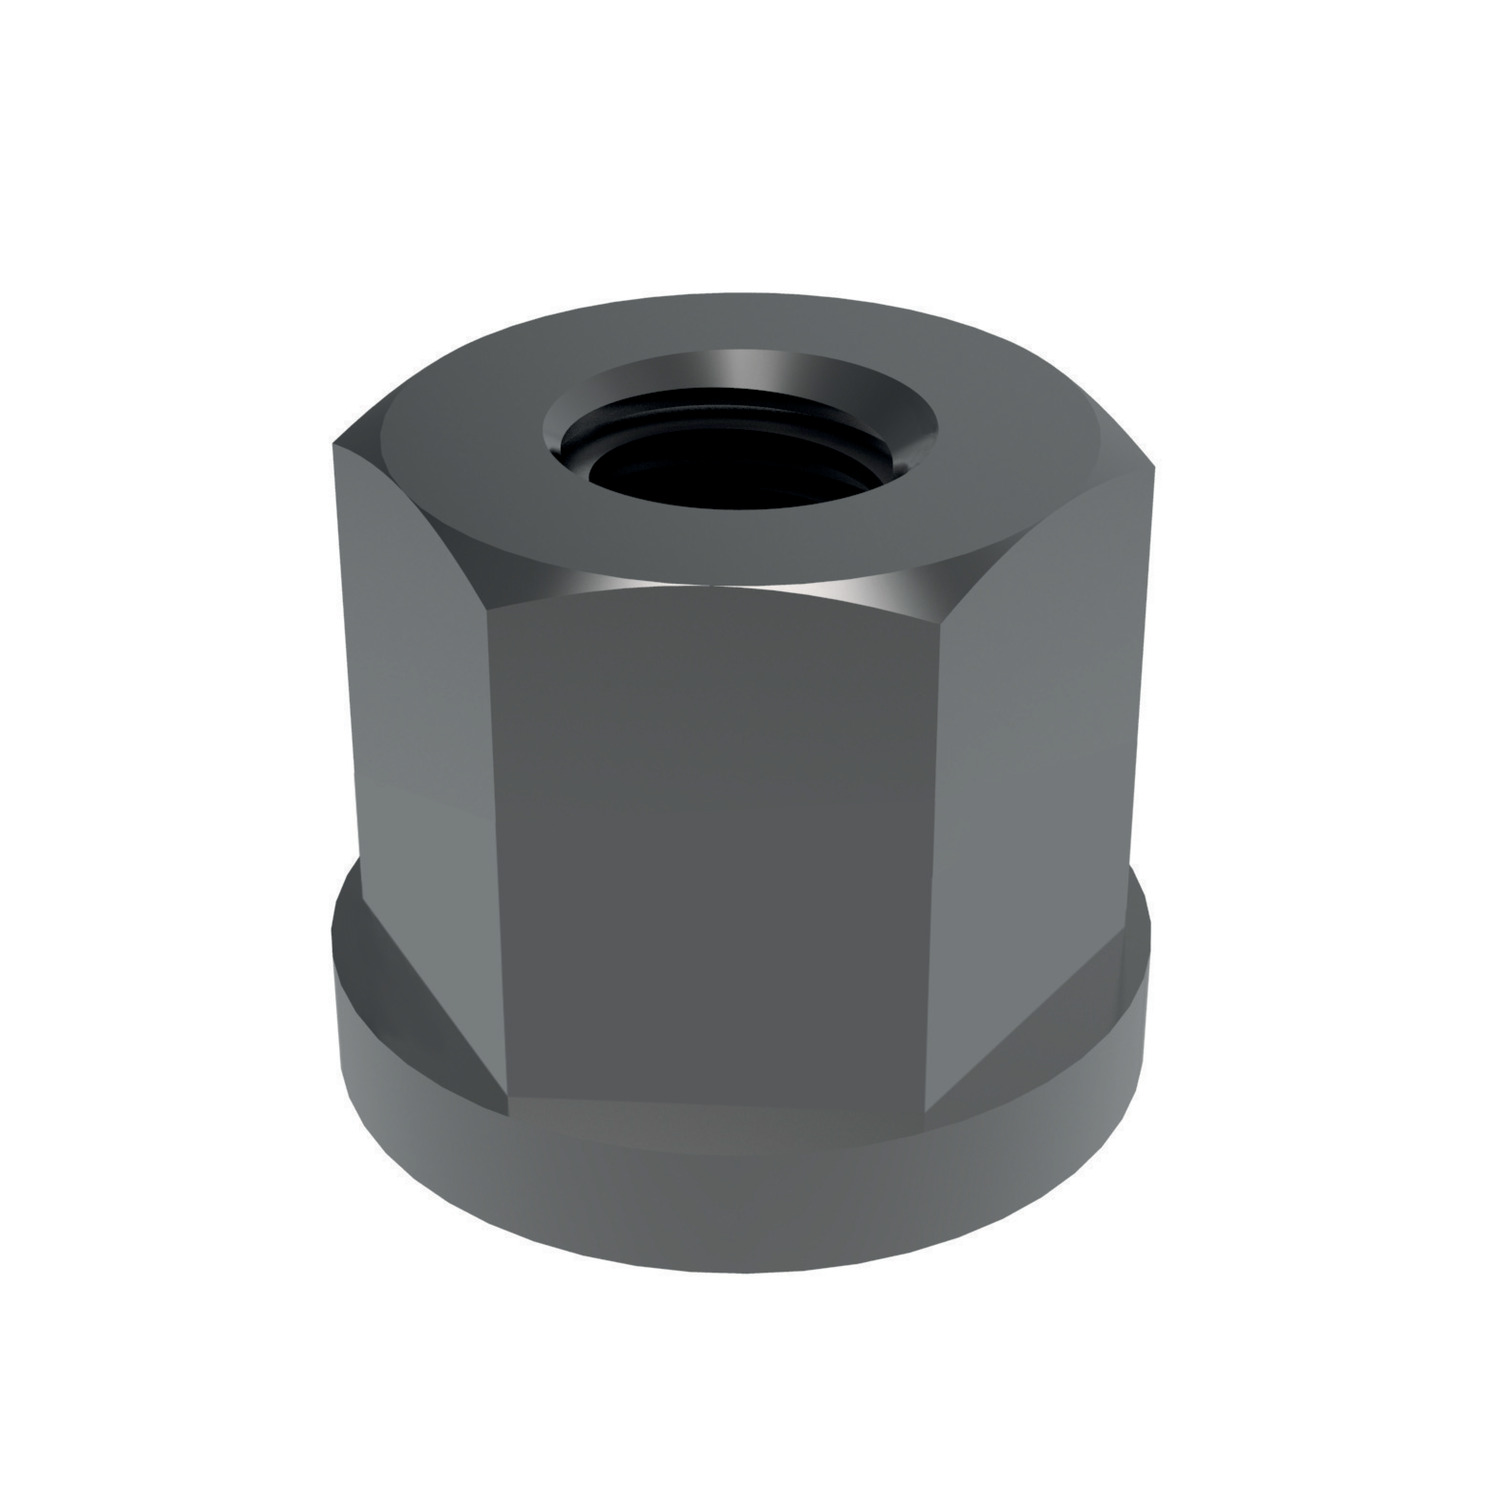 Collar Nuts Heat treated steel to tensile strength class 10. Turned and milled. DIN 6331.